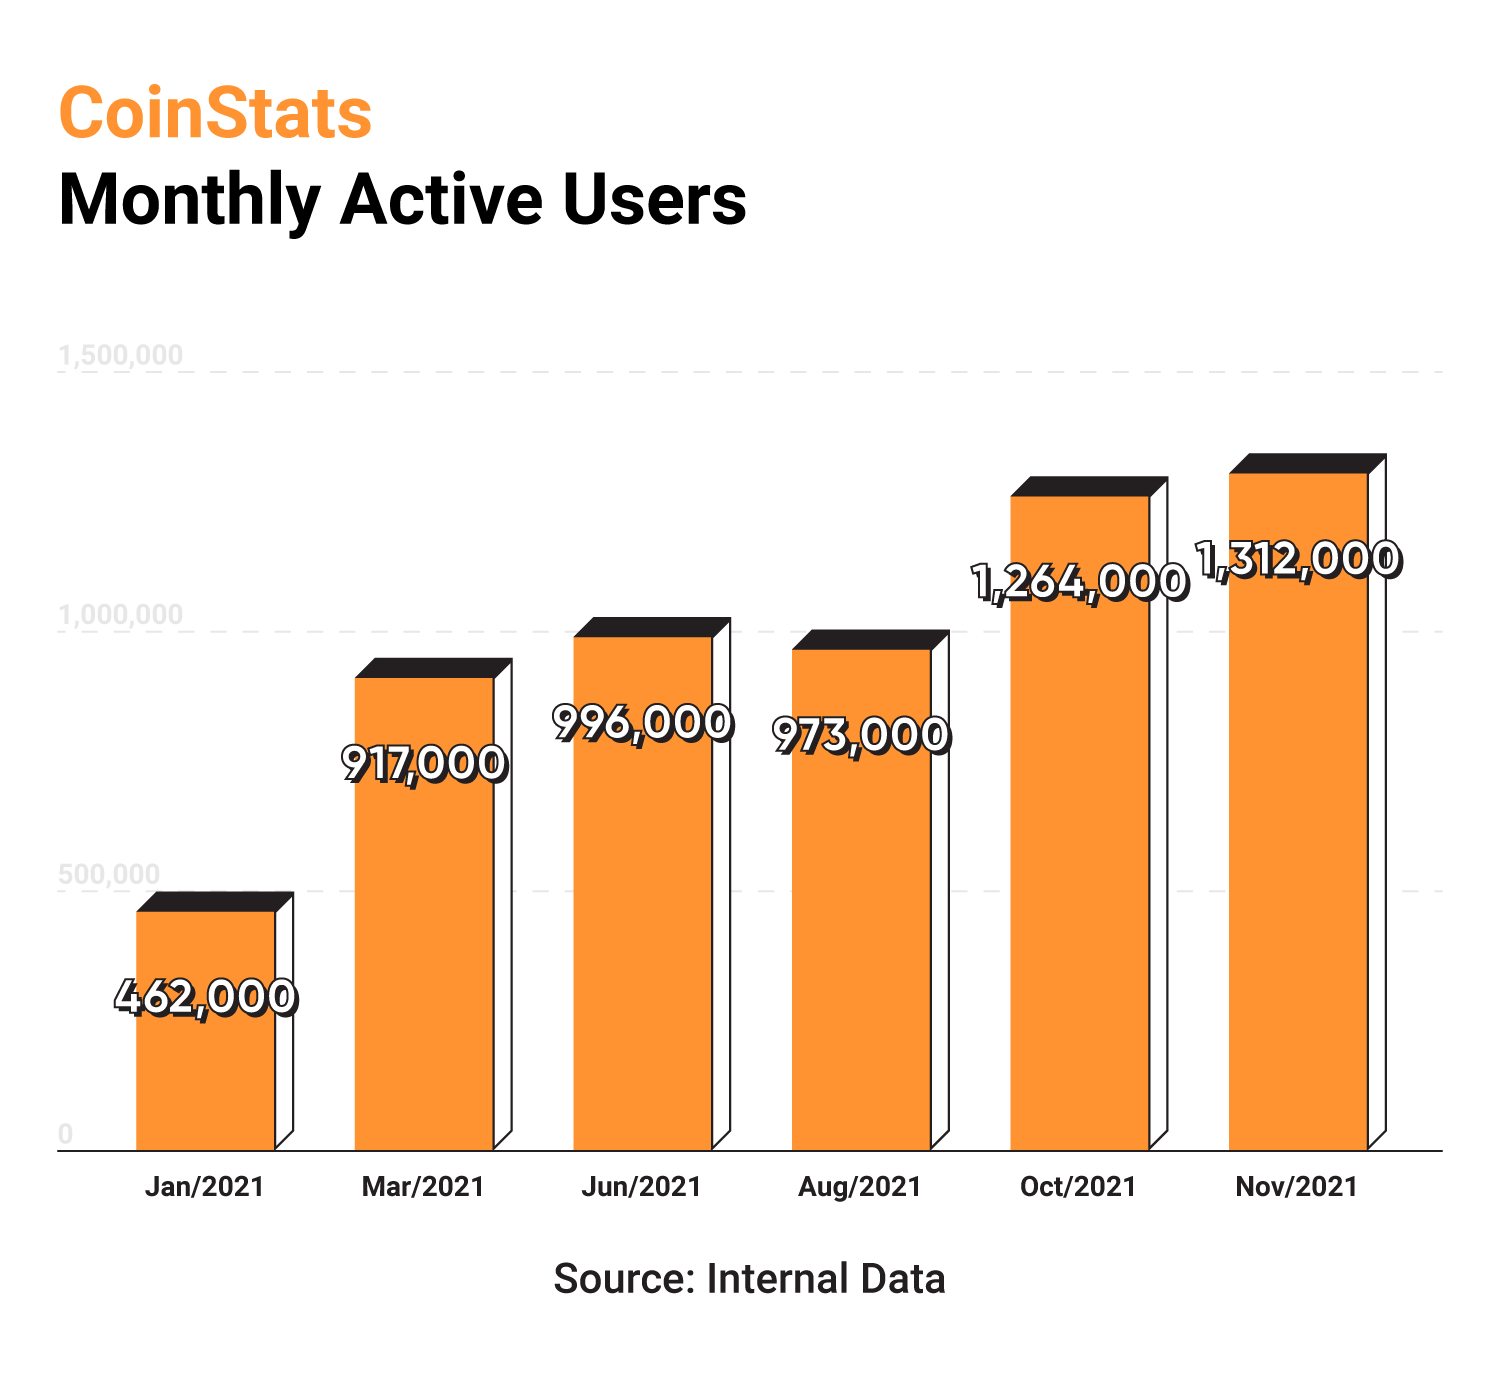 Monthly active users of CoinStats 2021